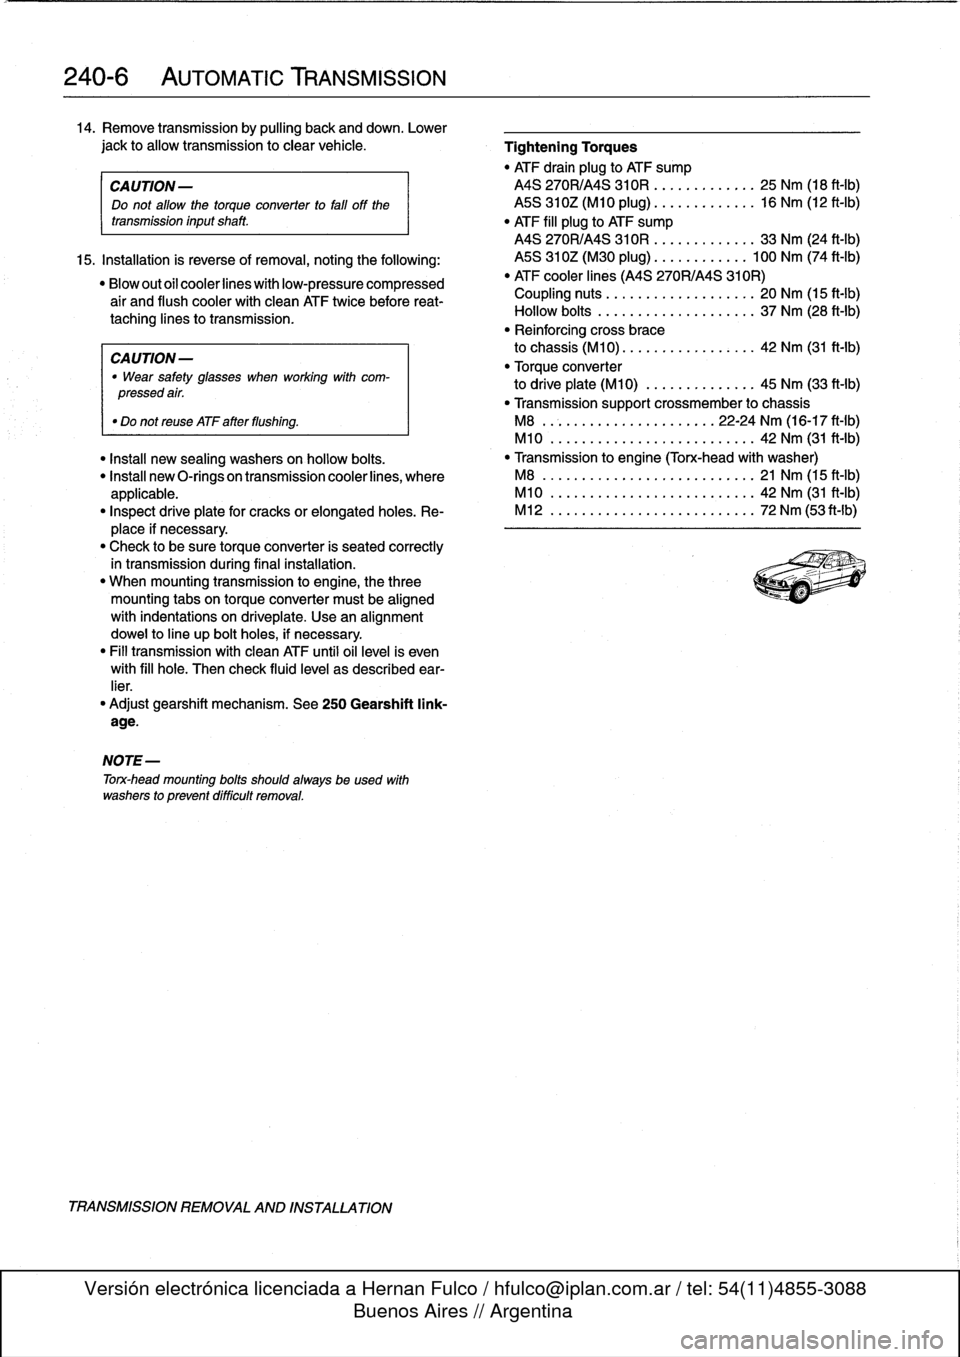 BMW 323i 1993 E36 User Guide 
240-
6

	

AUTOMATIC
TRANSMISSION

14
.
Remove
transmission
by
pulling
back
and
down
.
Lower

jack
to
allow
transmission
to
clear
vehicle
.

	

Tightening
Torques

"
ATF
drain
plug
to
ATF
sump

CA
UT